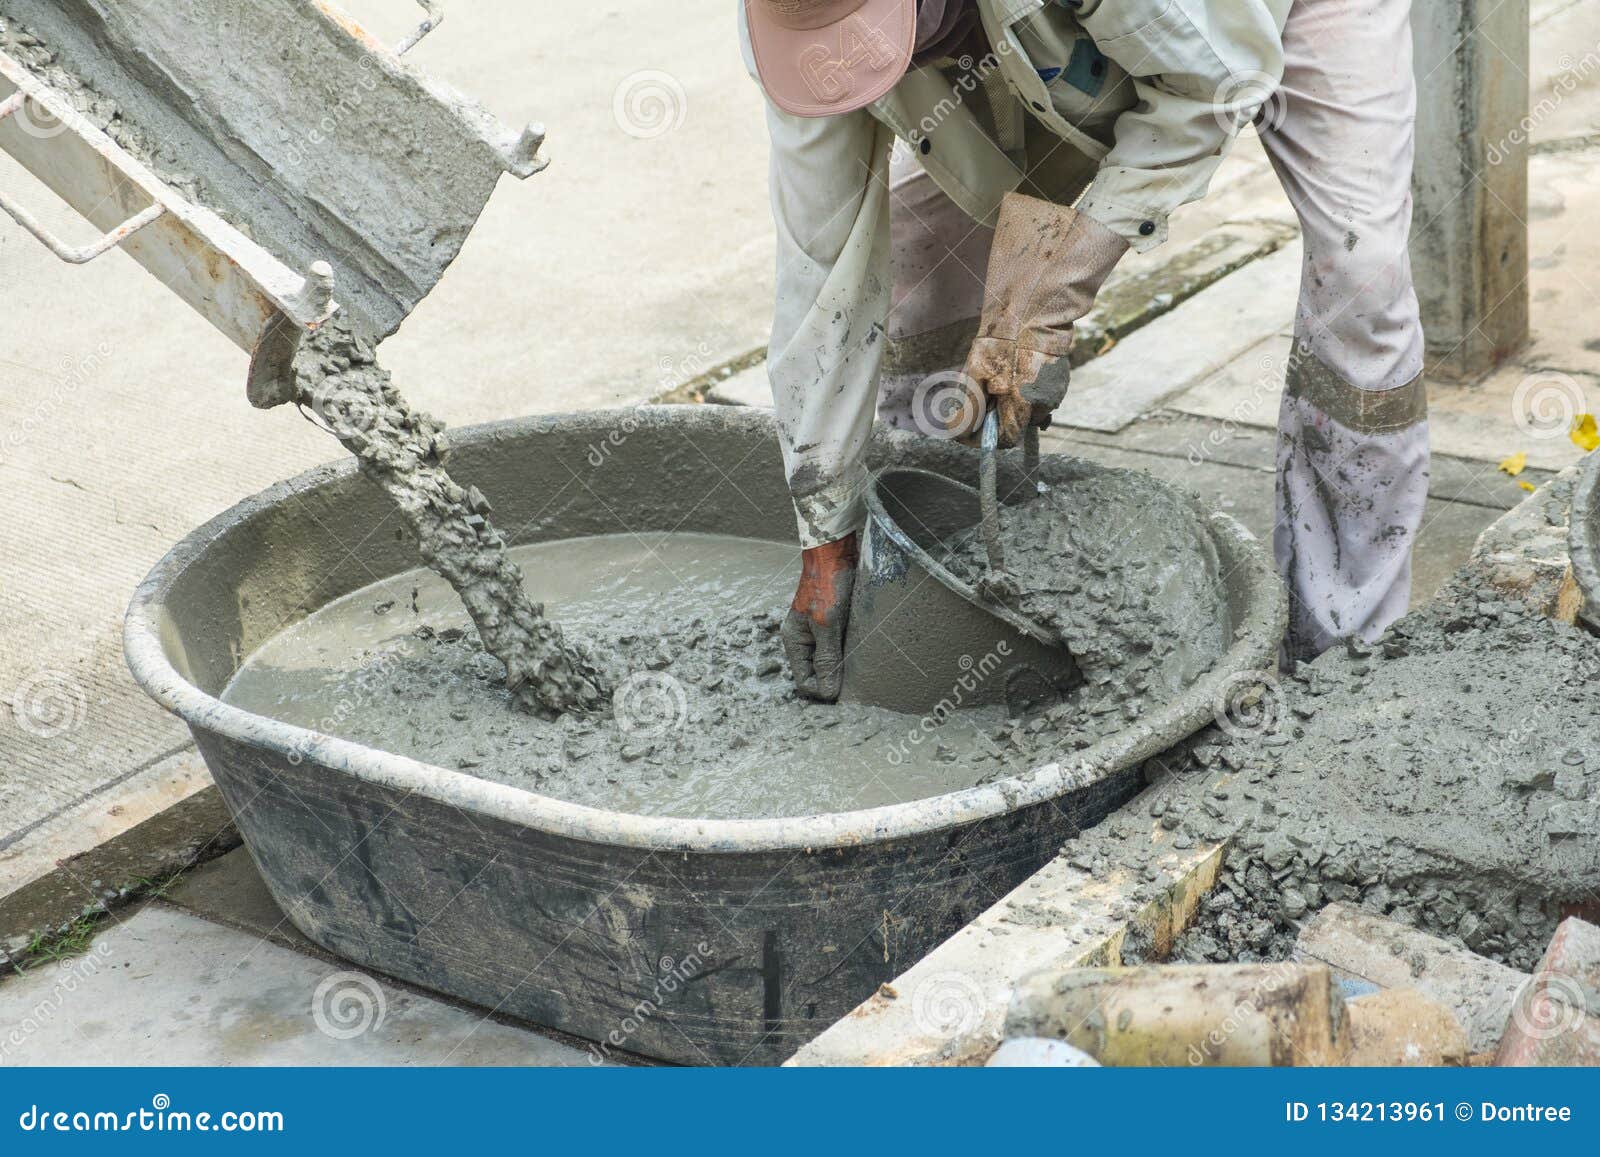 Builders are Pouring Ready-mixed Concrete Stock Image - Image of